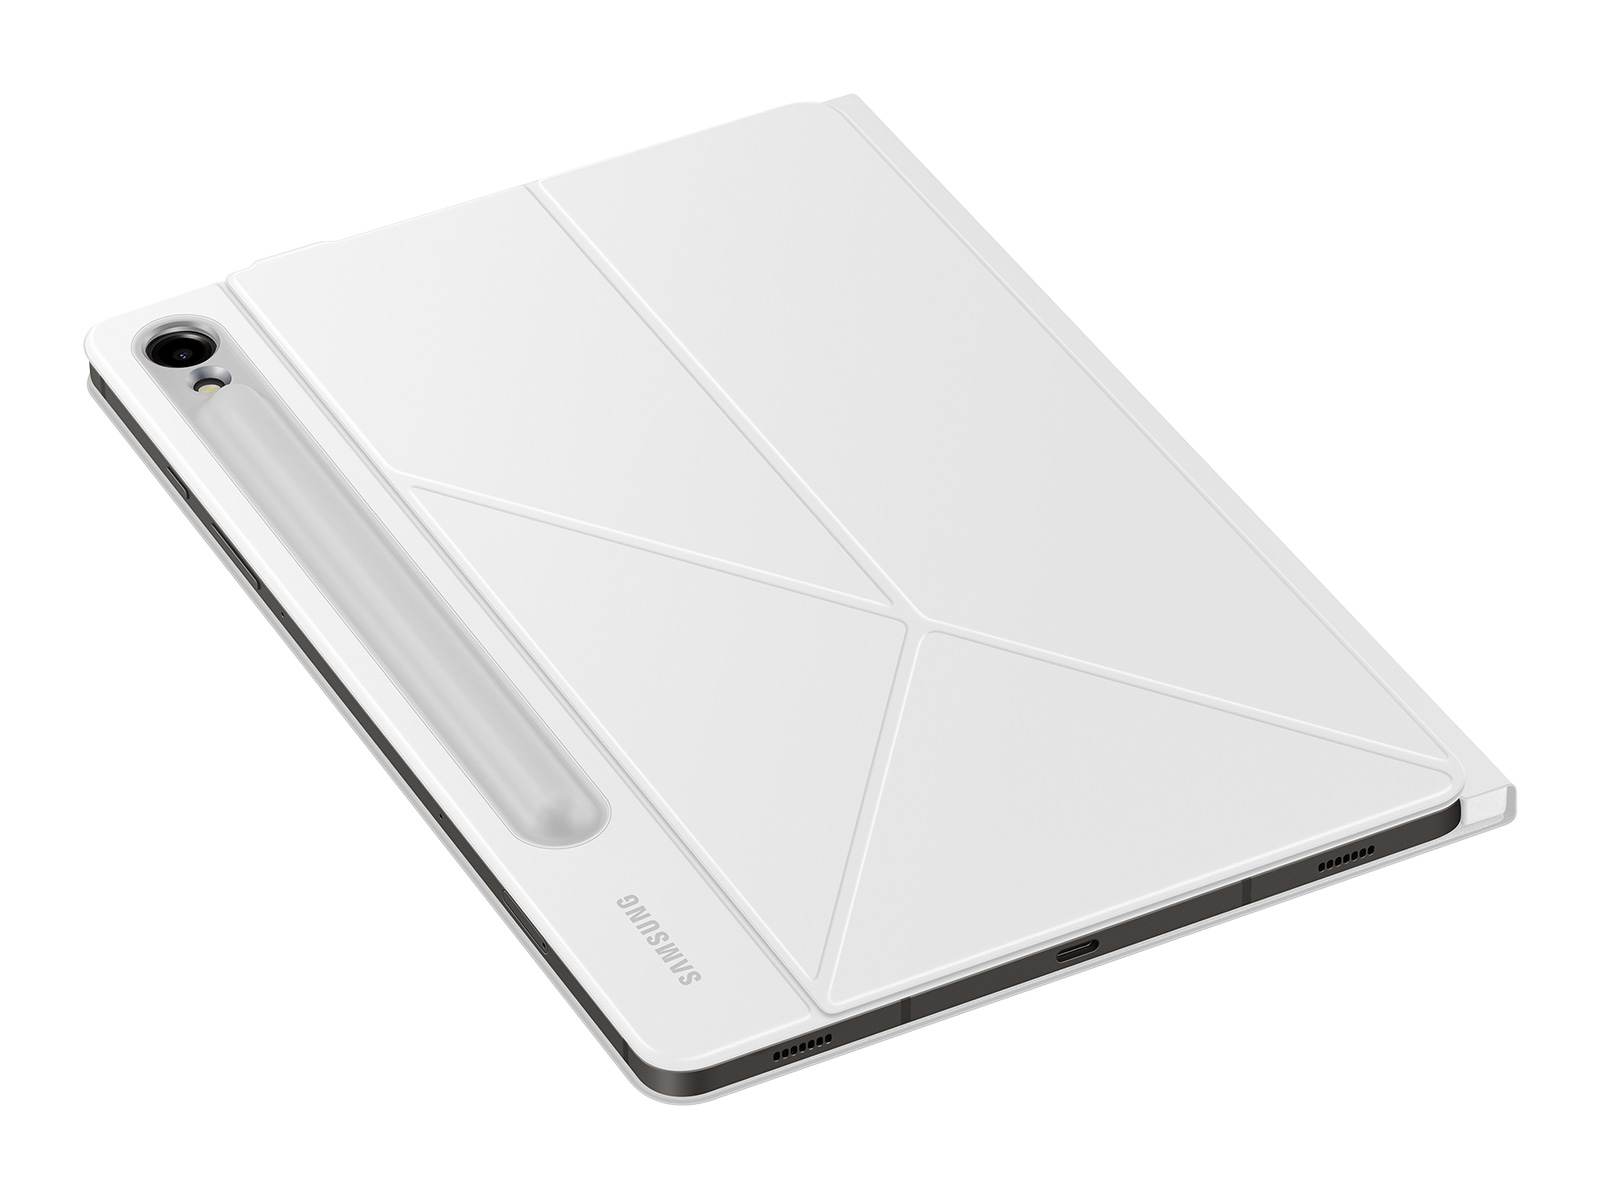 Samsung Galaxy Tab S9 FE: Best cases, screen protectors, and